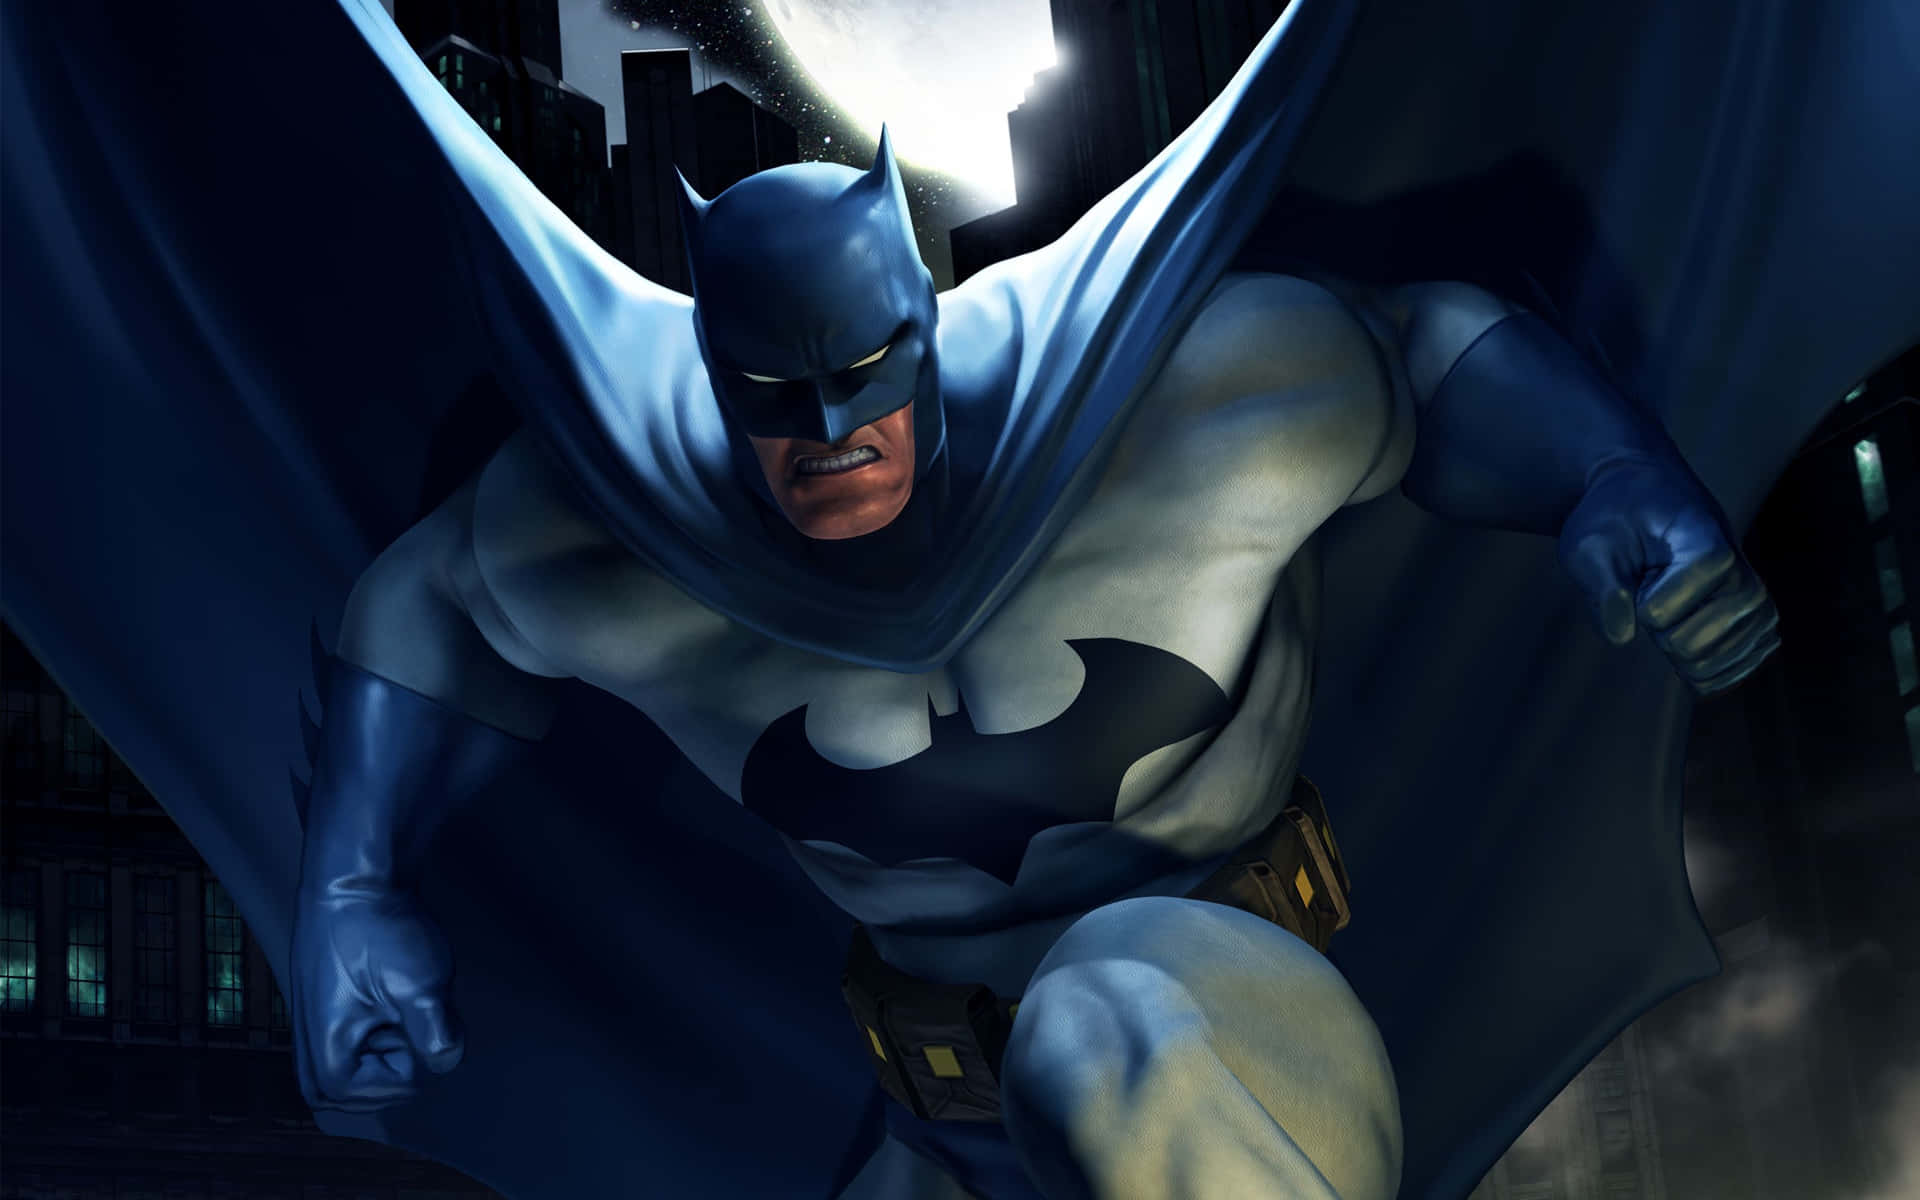 A Colorful, 4k Illustration Of A Superhero Facing The Night Background